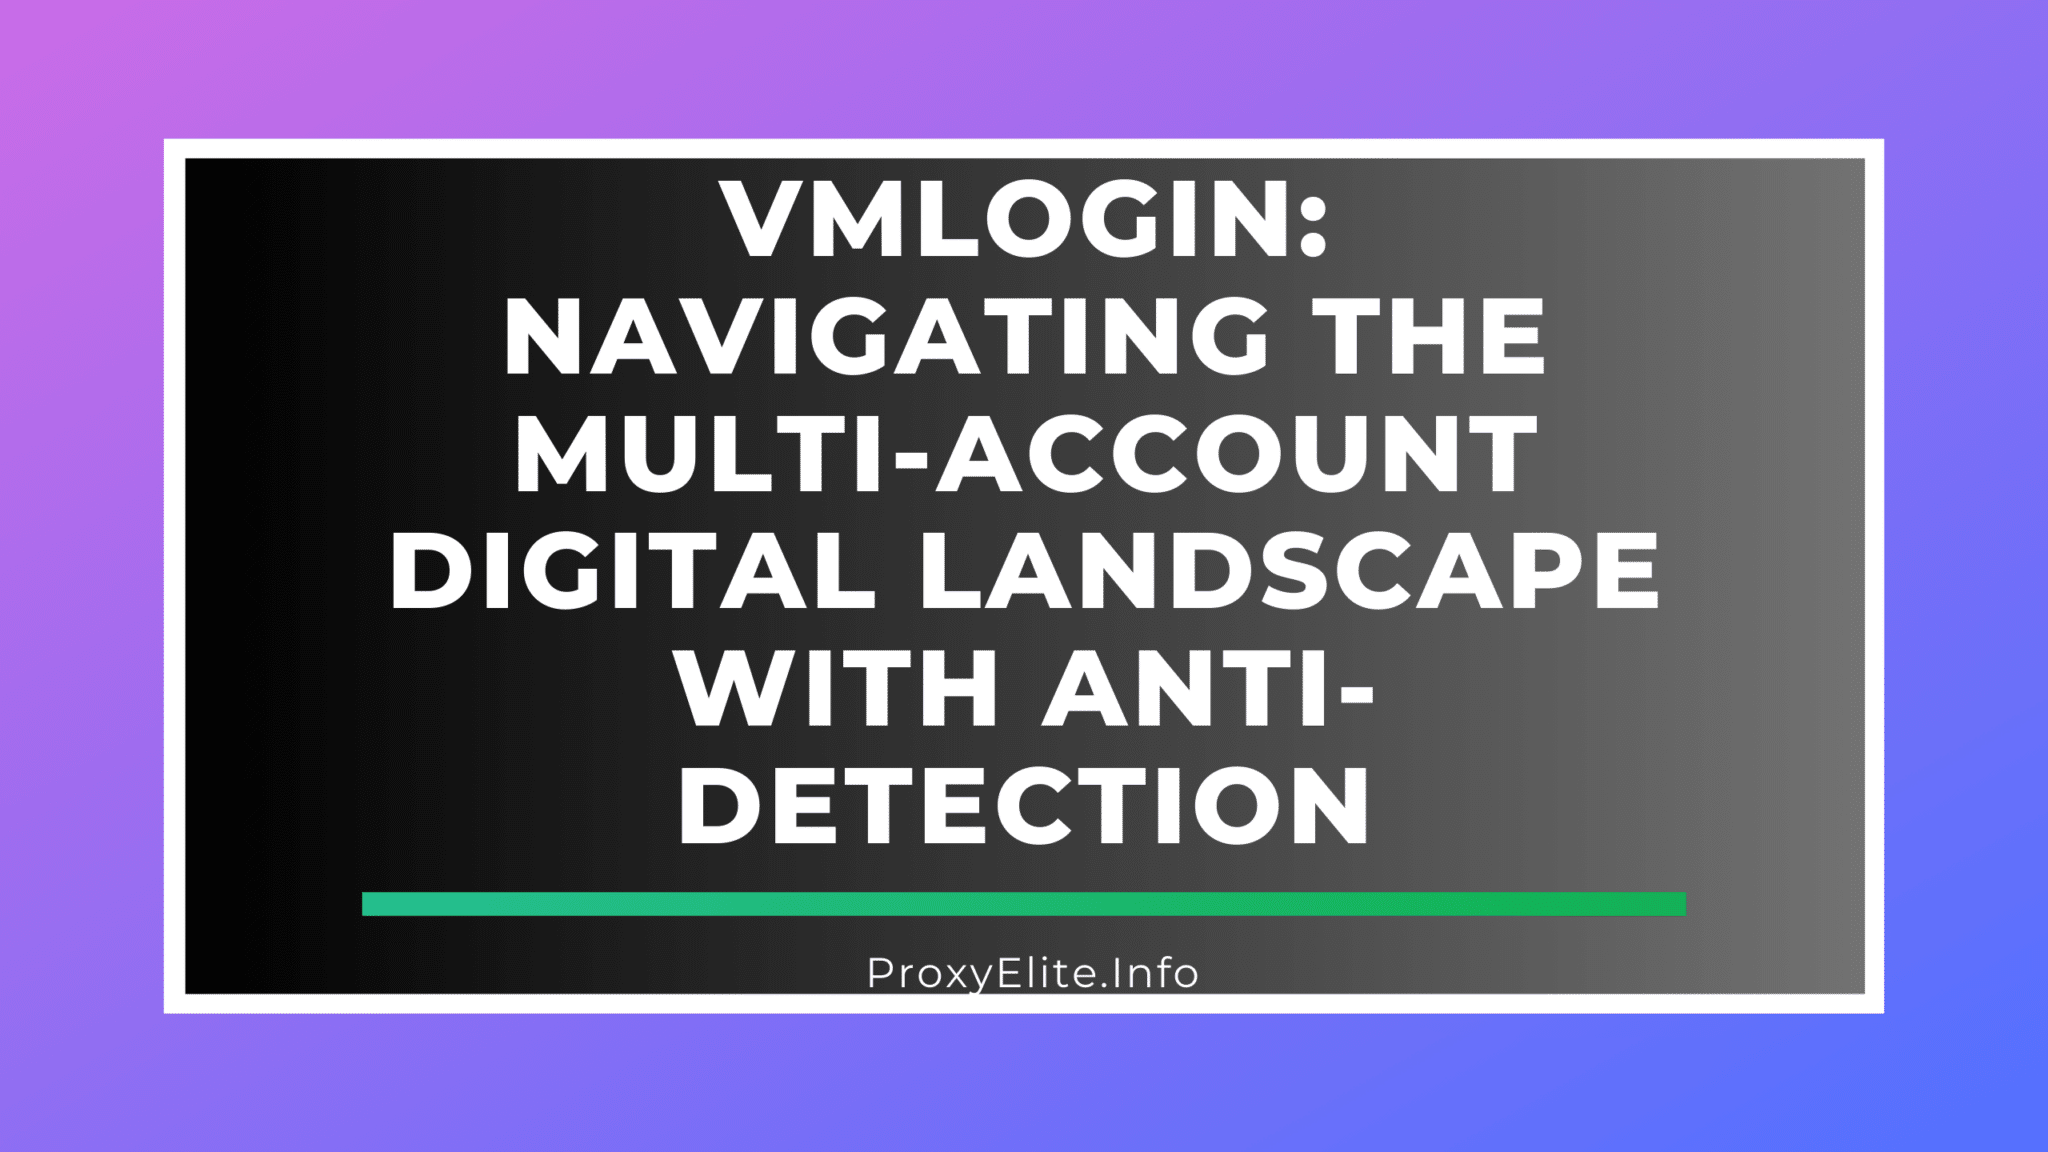 VMLogin: Navigating the Multi-Account Digital Landscape with Anti-Detection